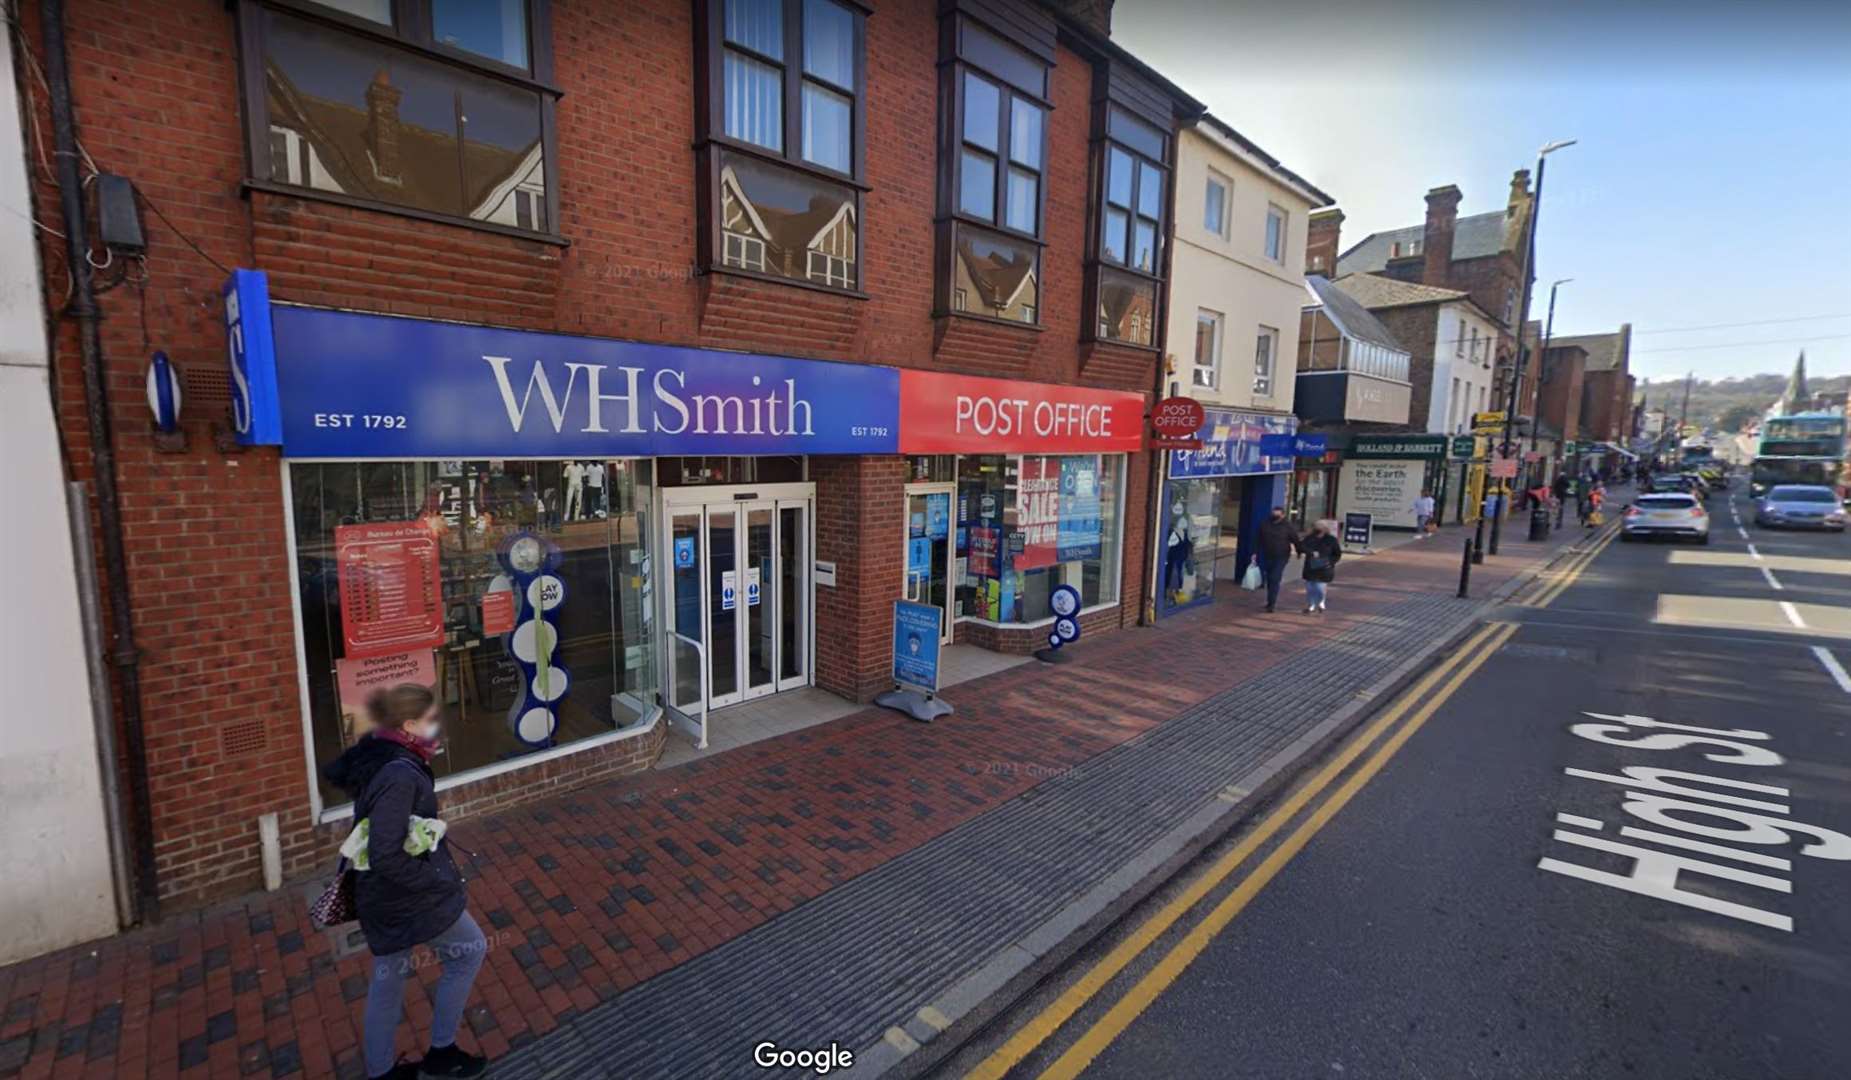 WHSmith, along with the adjacent Post Office, are shutting down in Tonbridge High Street later this month. Picture: Google